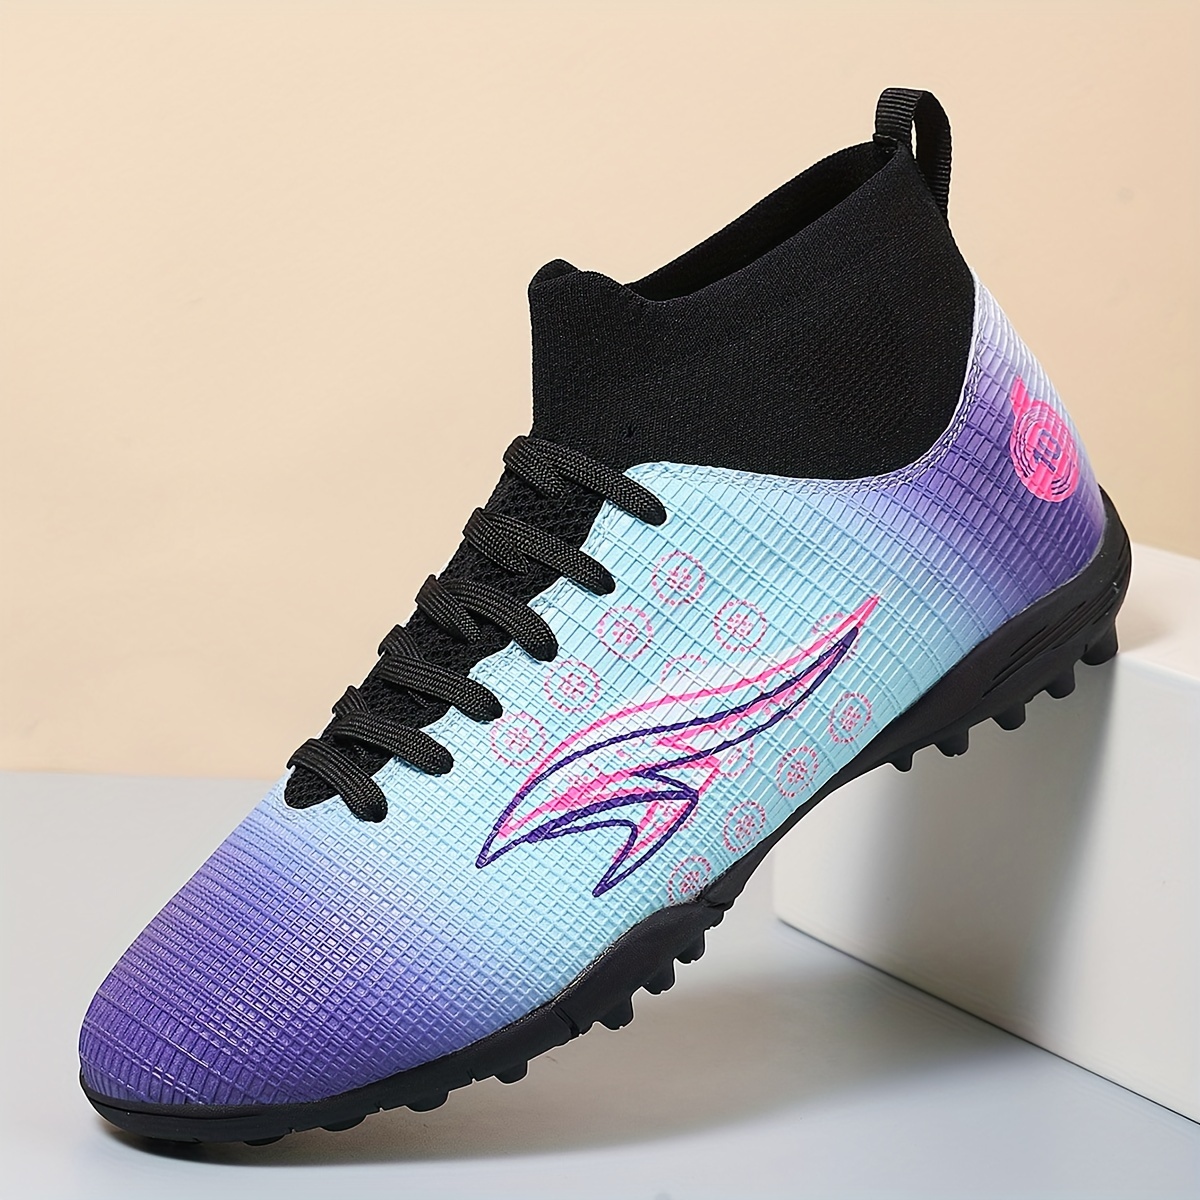 

Men's High Top Turf Football Boots, Professional Outdoor Anti-skid Breathable Lace Up Tf Soccer Cleats